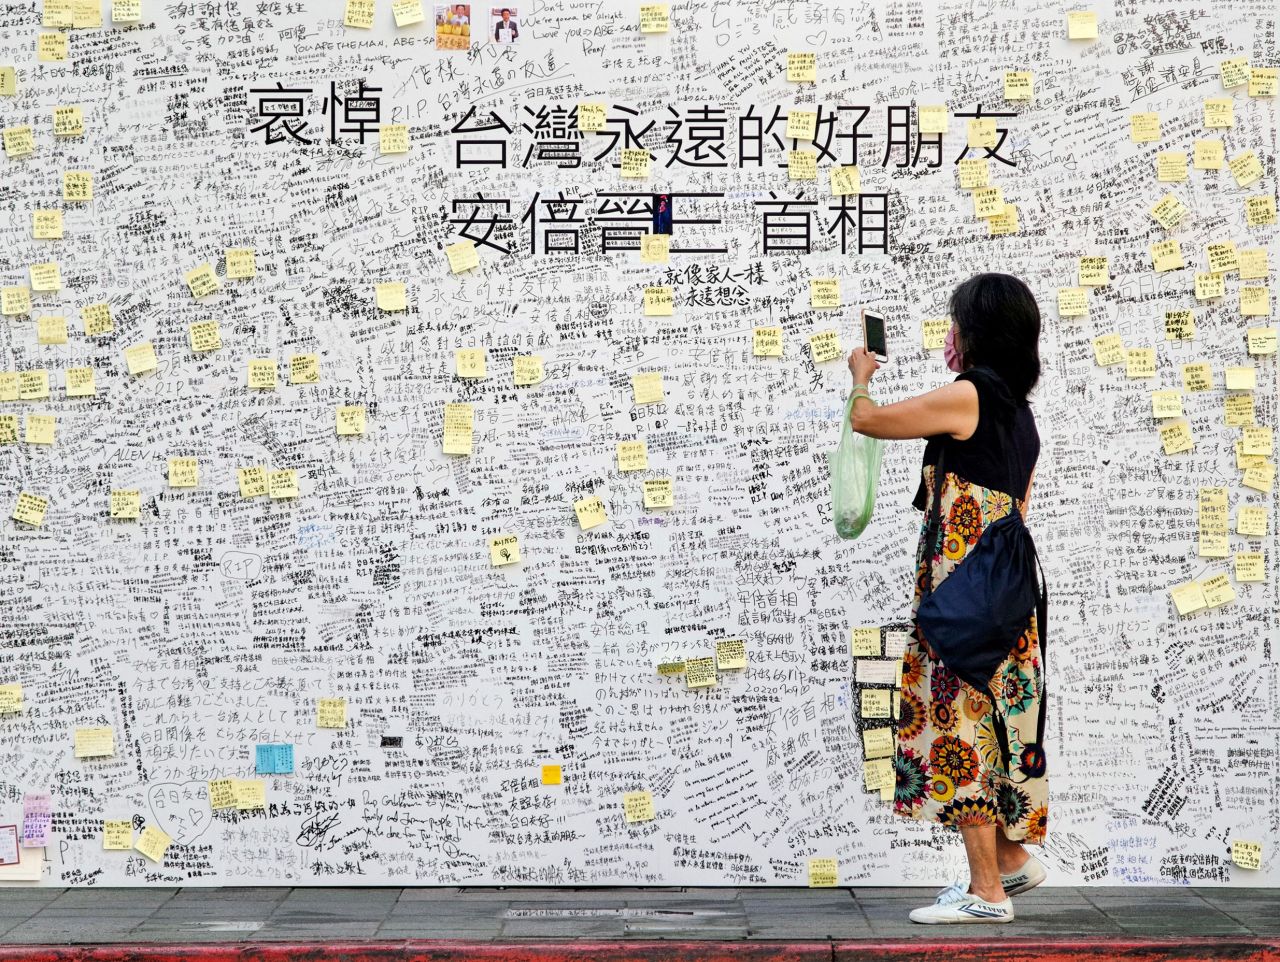 A woman takes a photograph of condolence messages for former Japanese prime minister Shinzo Abe in front of the Japan-Taiwan Exchange Association office in Taipei, Taiwan, on July 11.